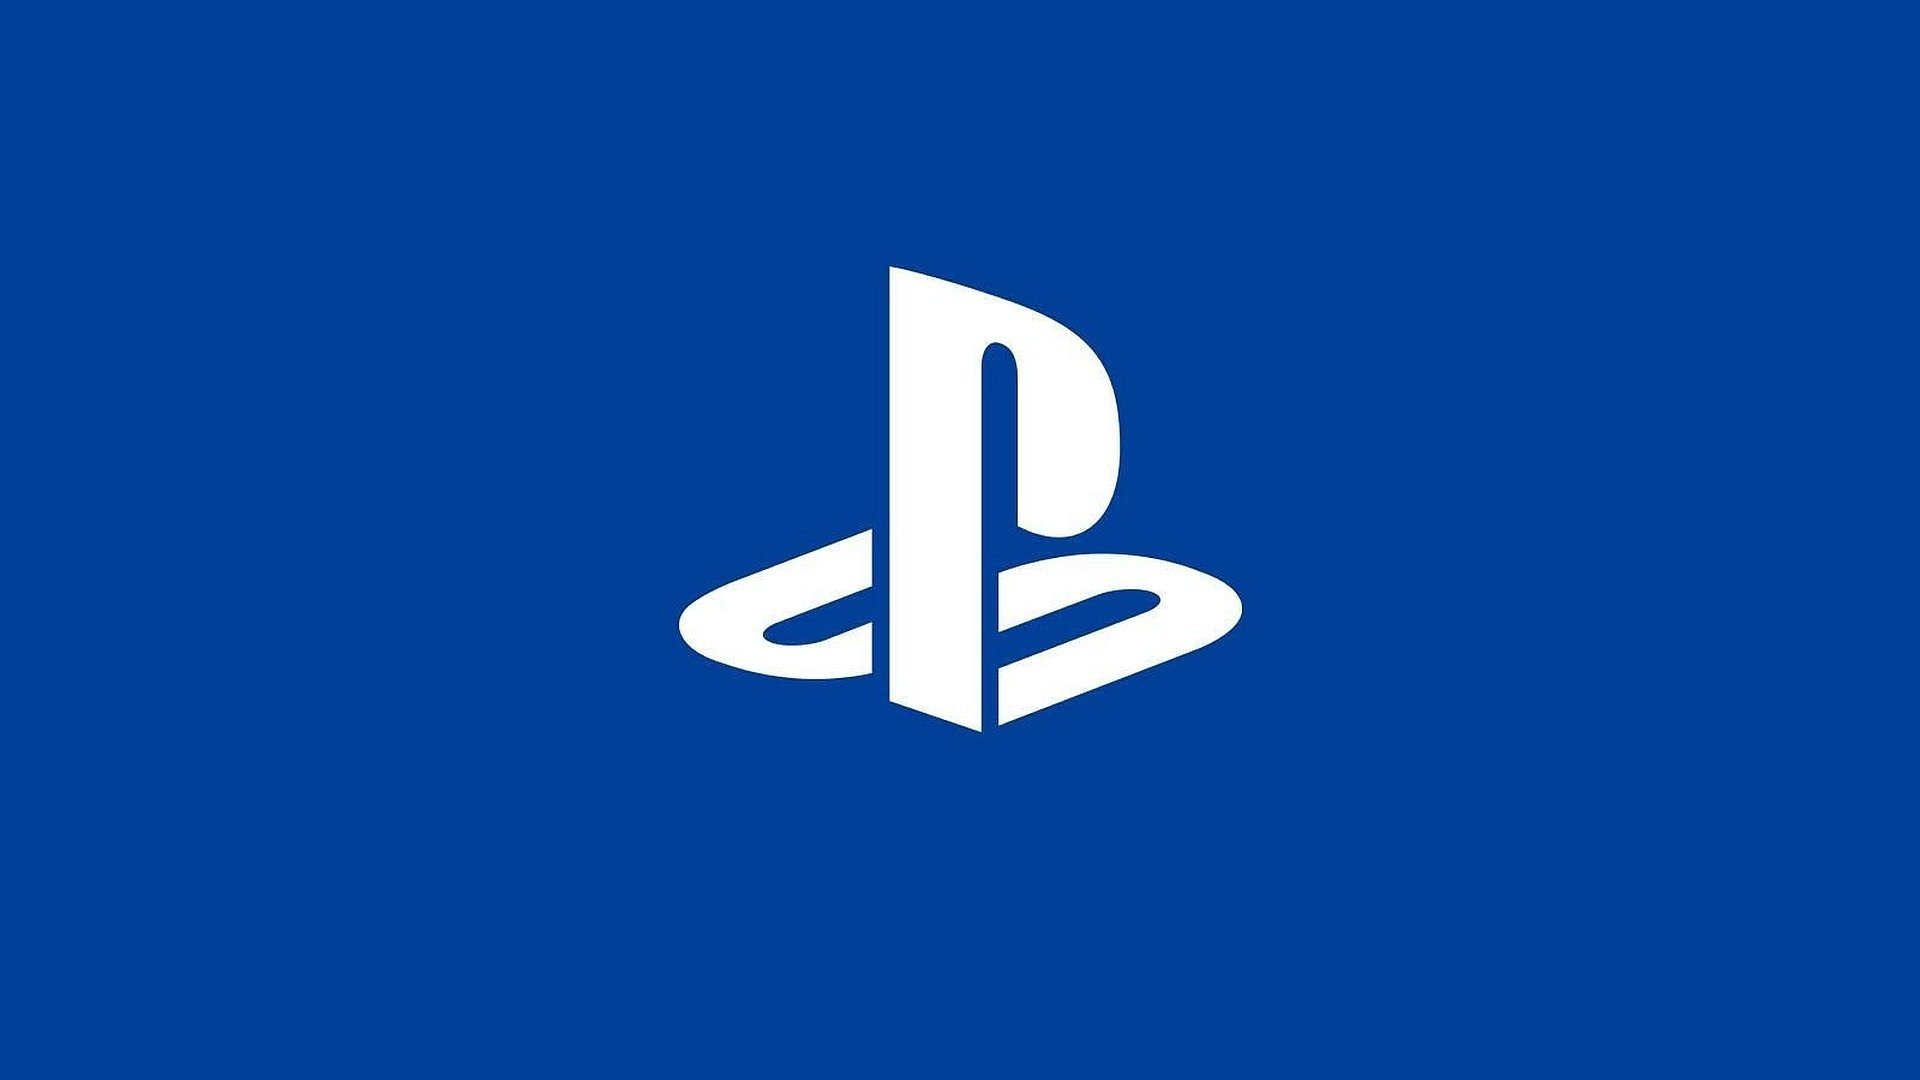 PS4 software update 7.00 brings changes to Parties, Remote Play